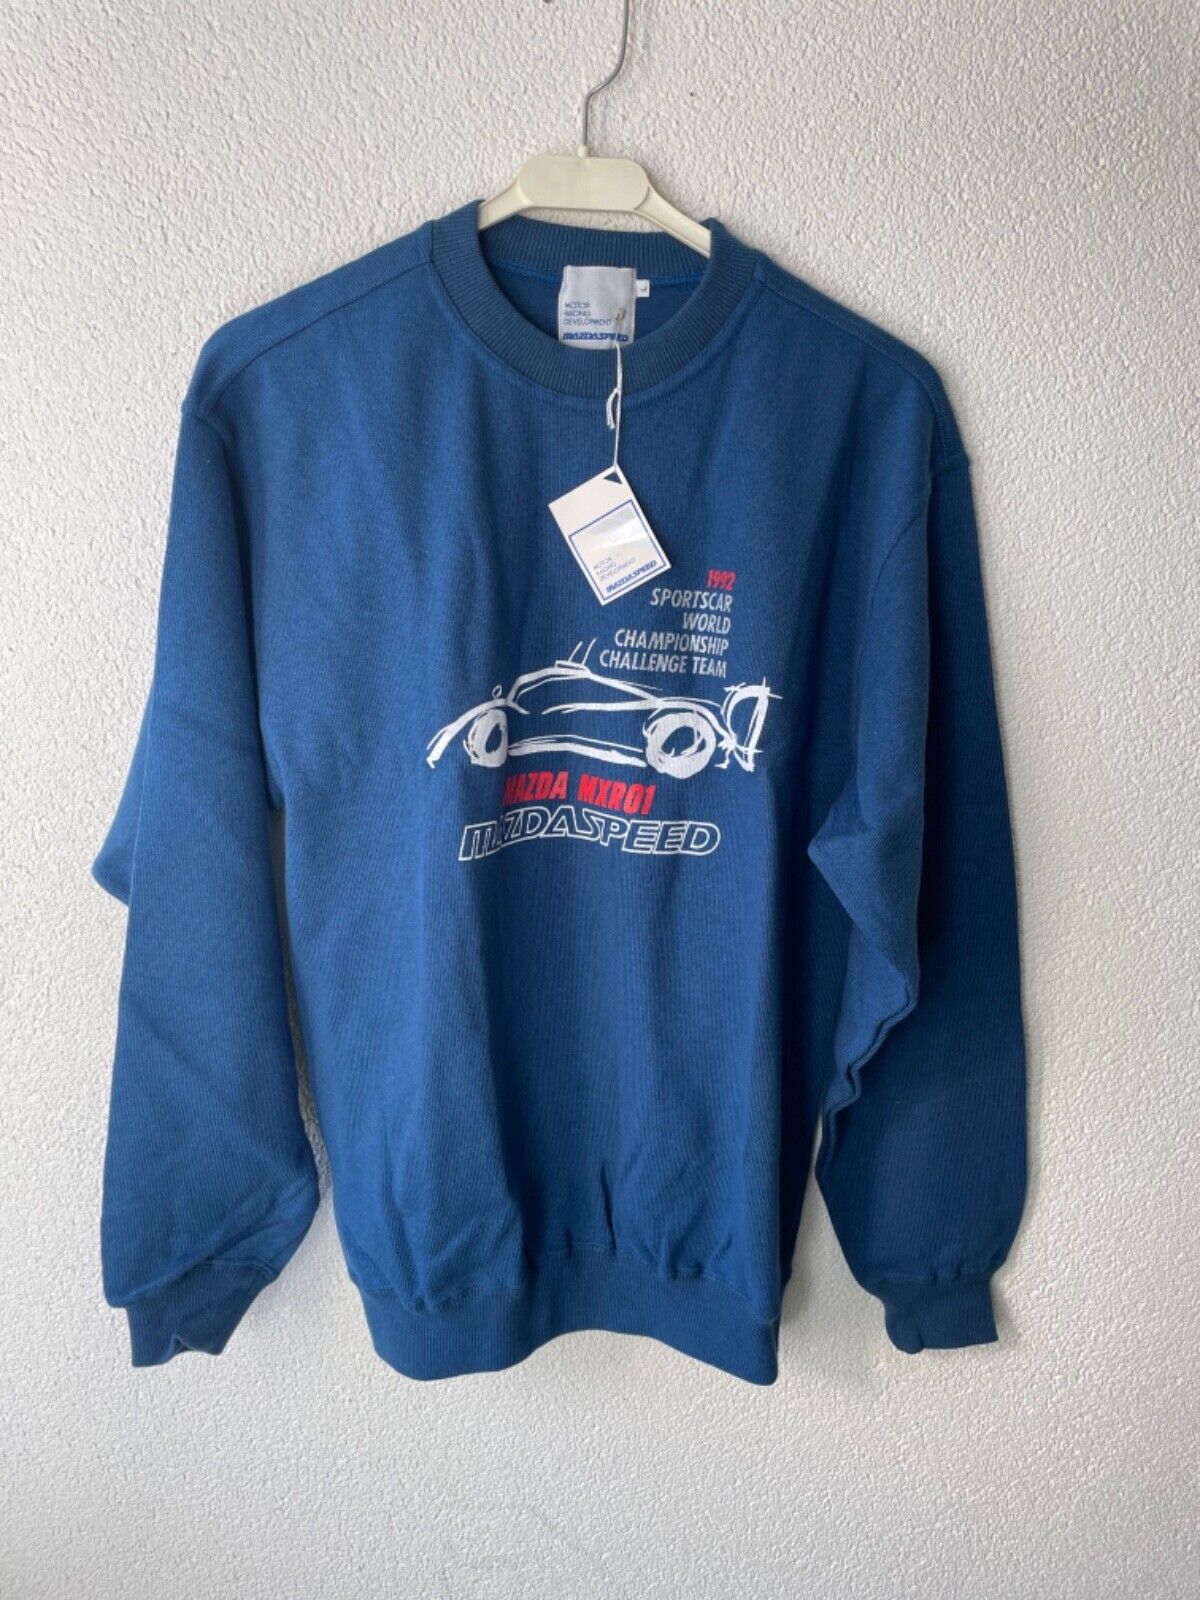 Mazdaspeed 90s Sweater Rare Le Mans Jacket Vintage Apparel RX7 RX8 FC3S FD3S Jdm